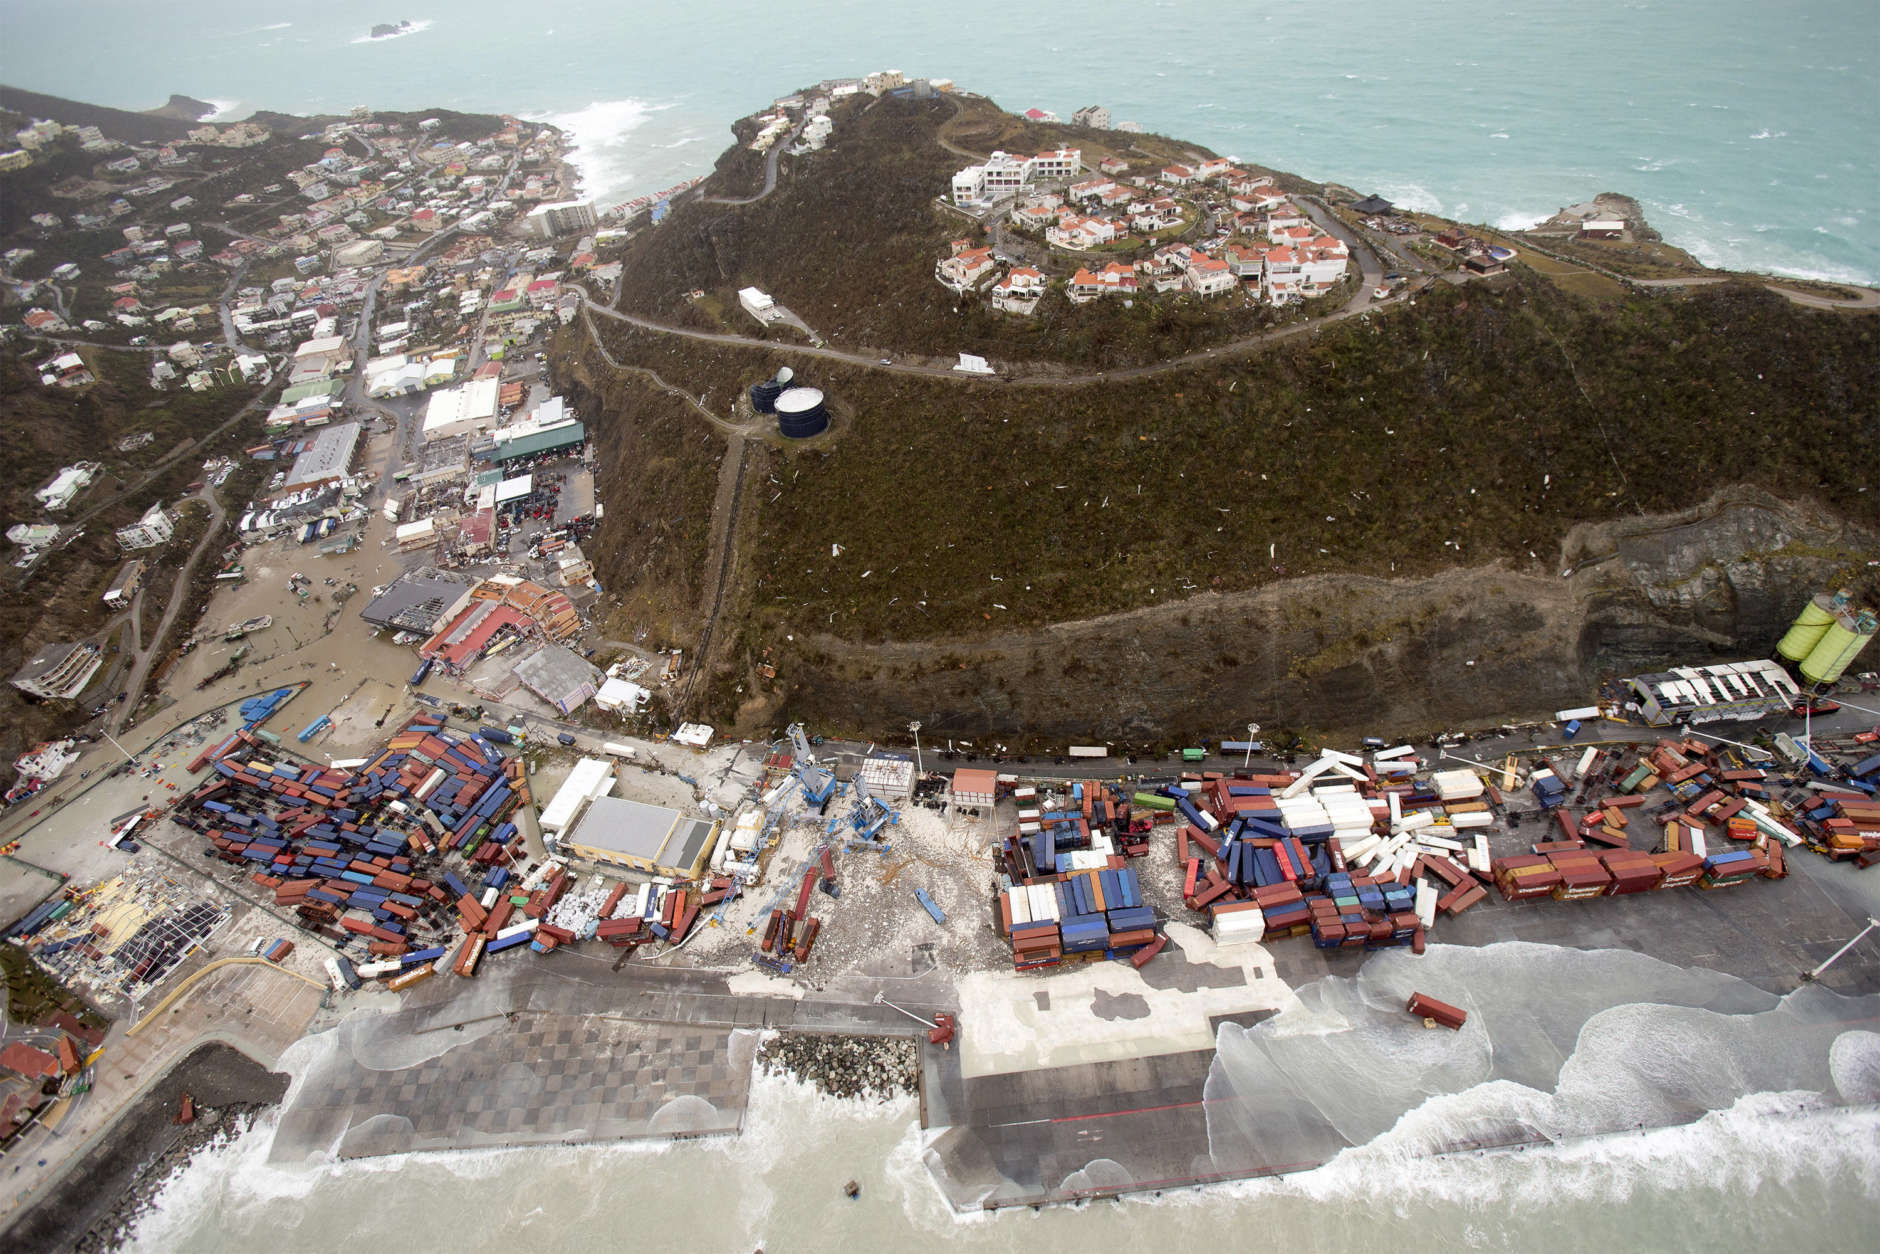 This Sept. 6, 2017 photo provided by the Dutch Defense Ministry shows a view of St. Maarten, in the aftermath of Hurricane Irma. Irma cut a path of devastation across the northern Caribbean, leaving thousands homeless after destroying buildings and uprooting trees. Significant damage was reported on the island that is split between French and Dutch control. (Gerben Van Es/Dutch Defense Ministry via AP)